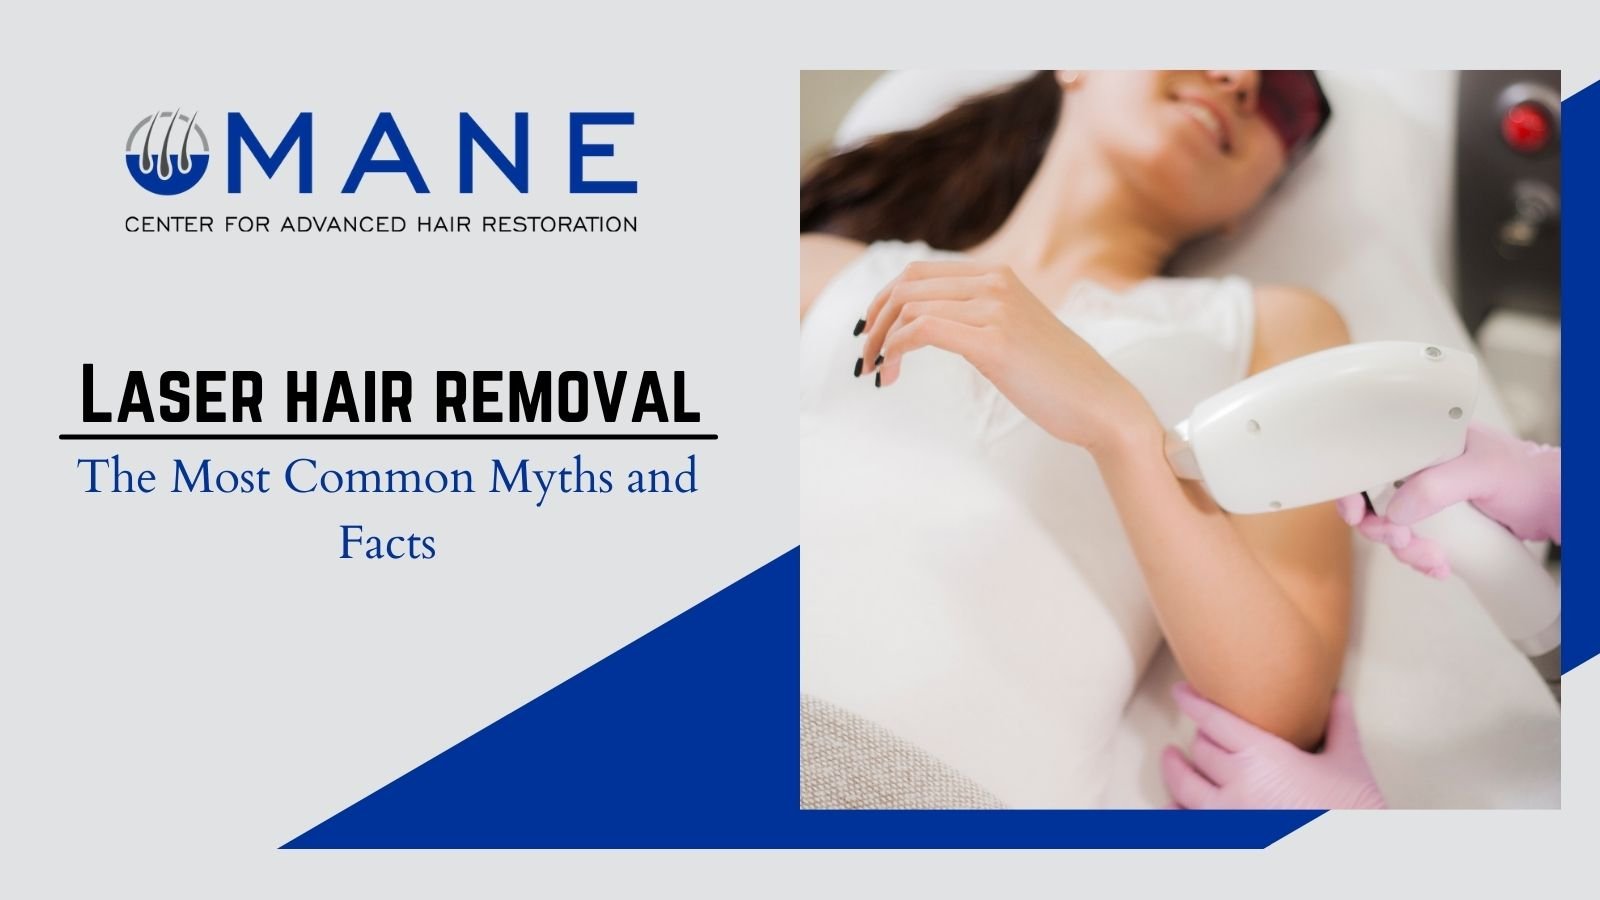 Laser Hair Removal- The Most Common Myths and Facts